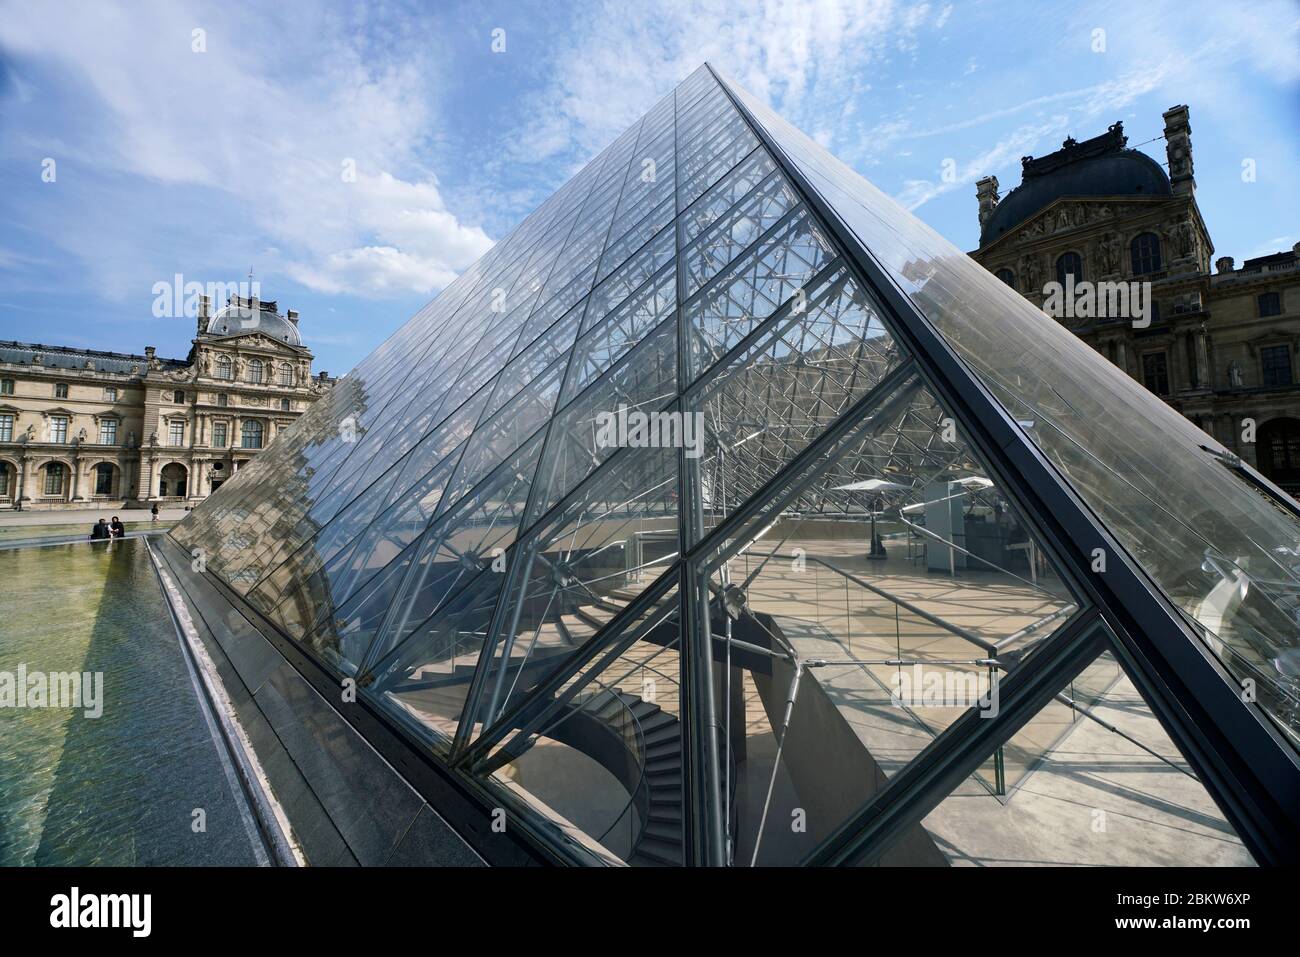 Napoleon Courtyard with I.M.Pei designed glass Pyramid in Louvre Palace museum.Paris.France Stock Photo